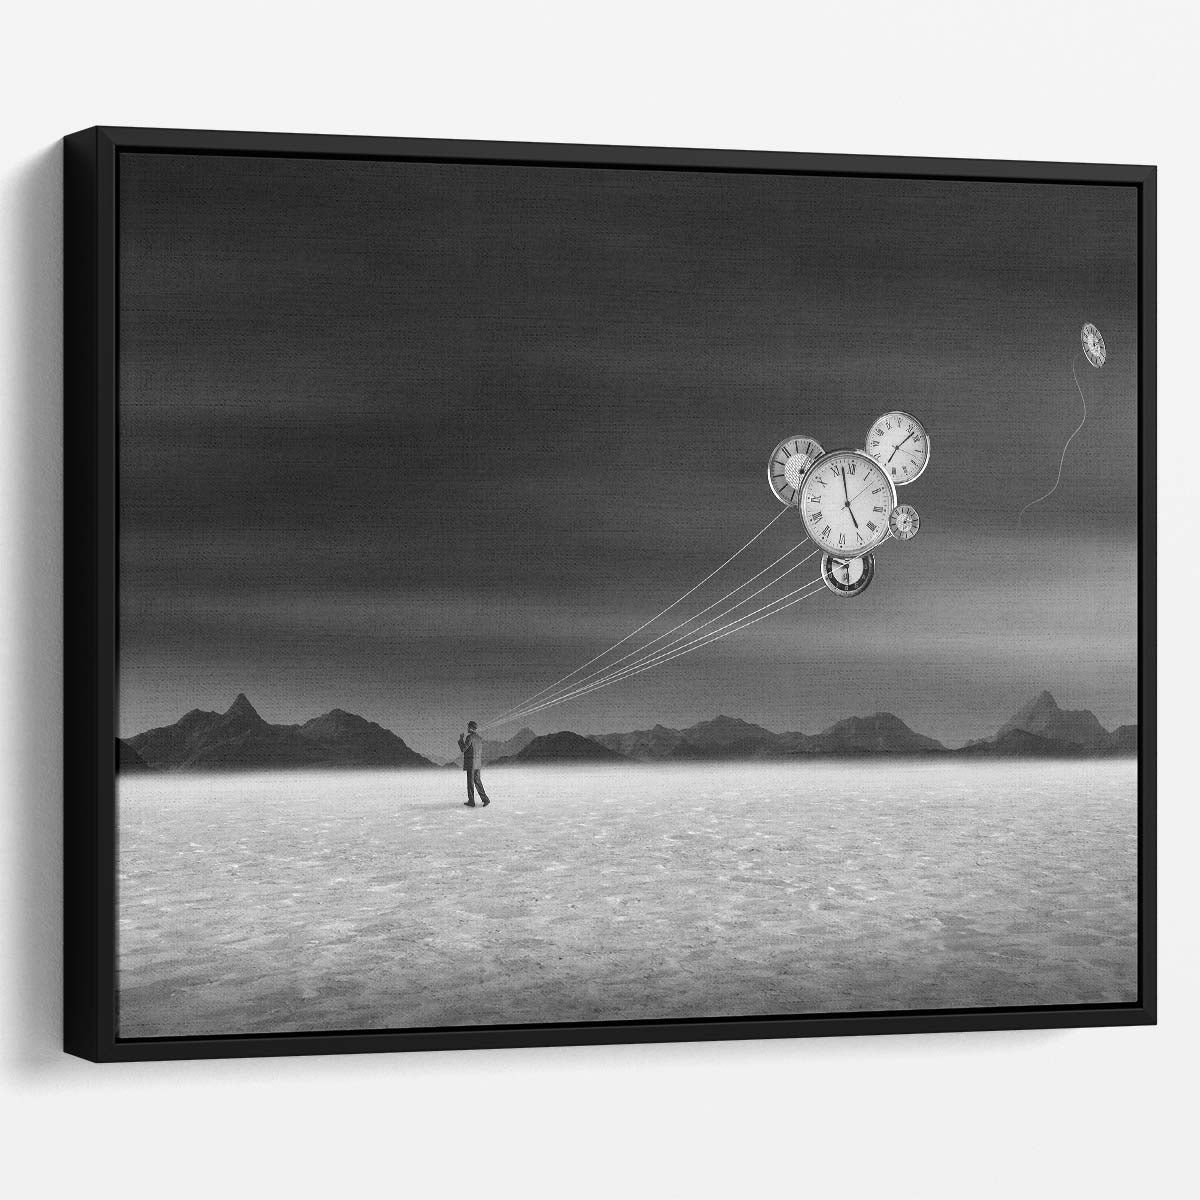 Surreal Timekeeper's Lonely Journey Wall Art by Luxuriance Designs. Made in USA.